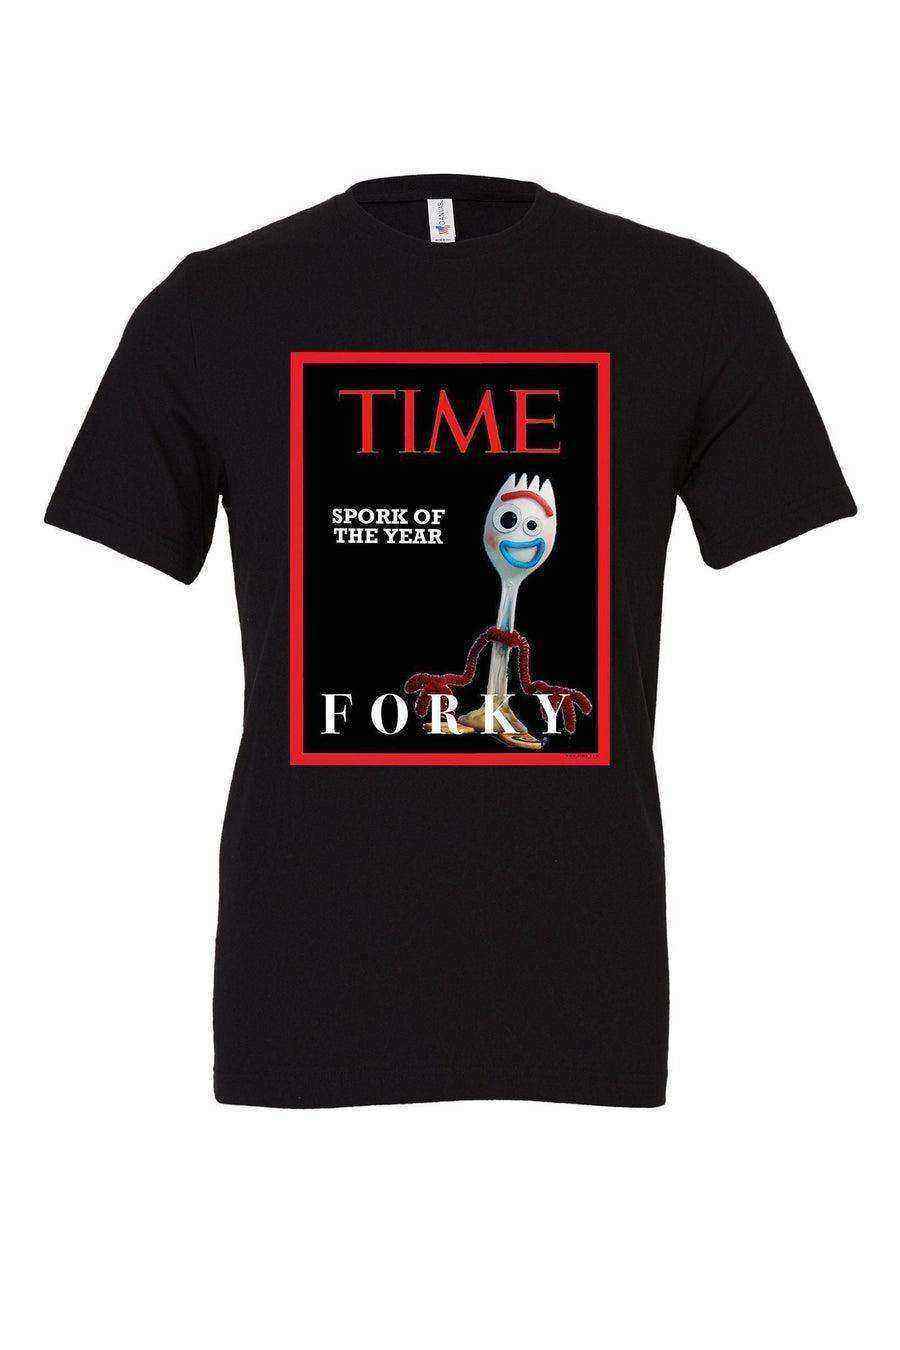 Womens | Forky Spork Of The Year Shirt | Forky On The Cover Of Time Shirt - Dylan's Tees